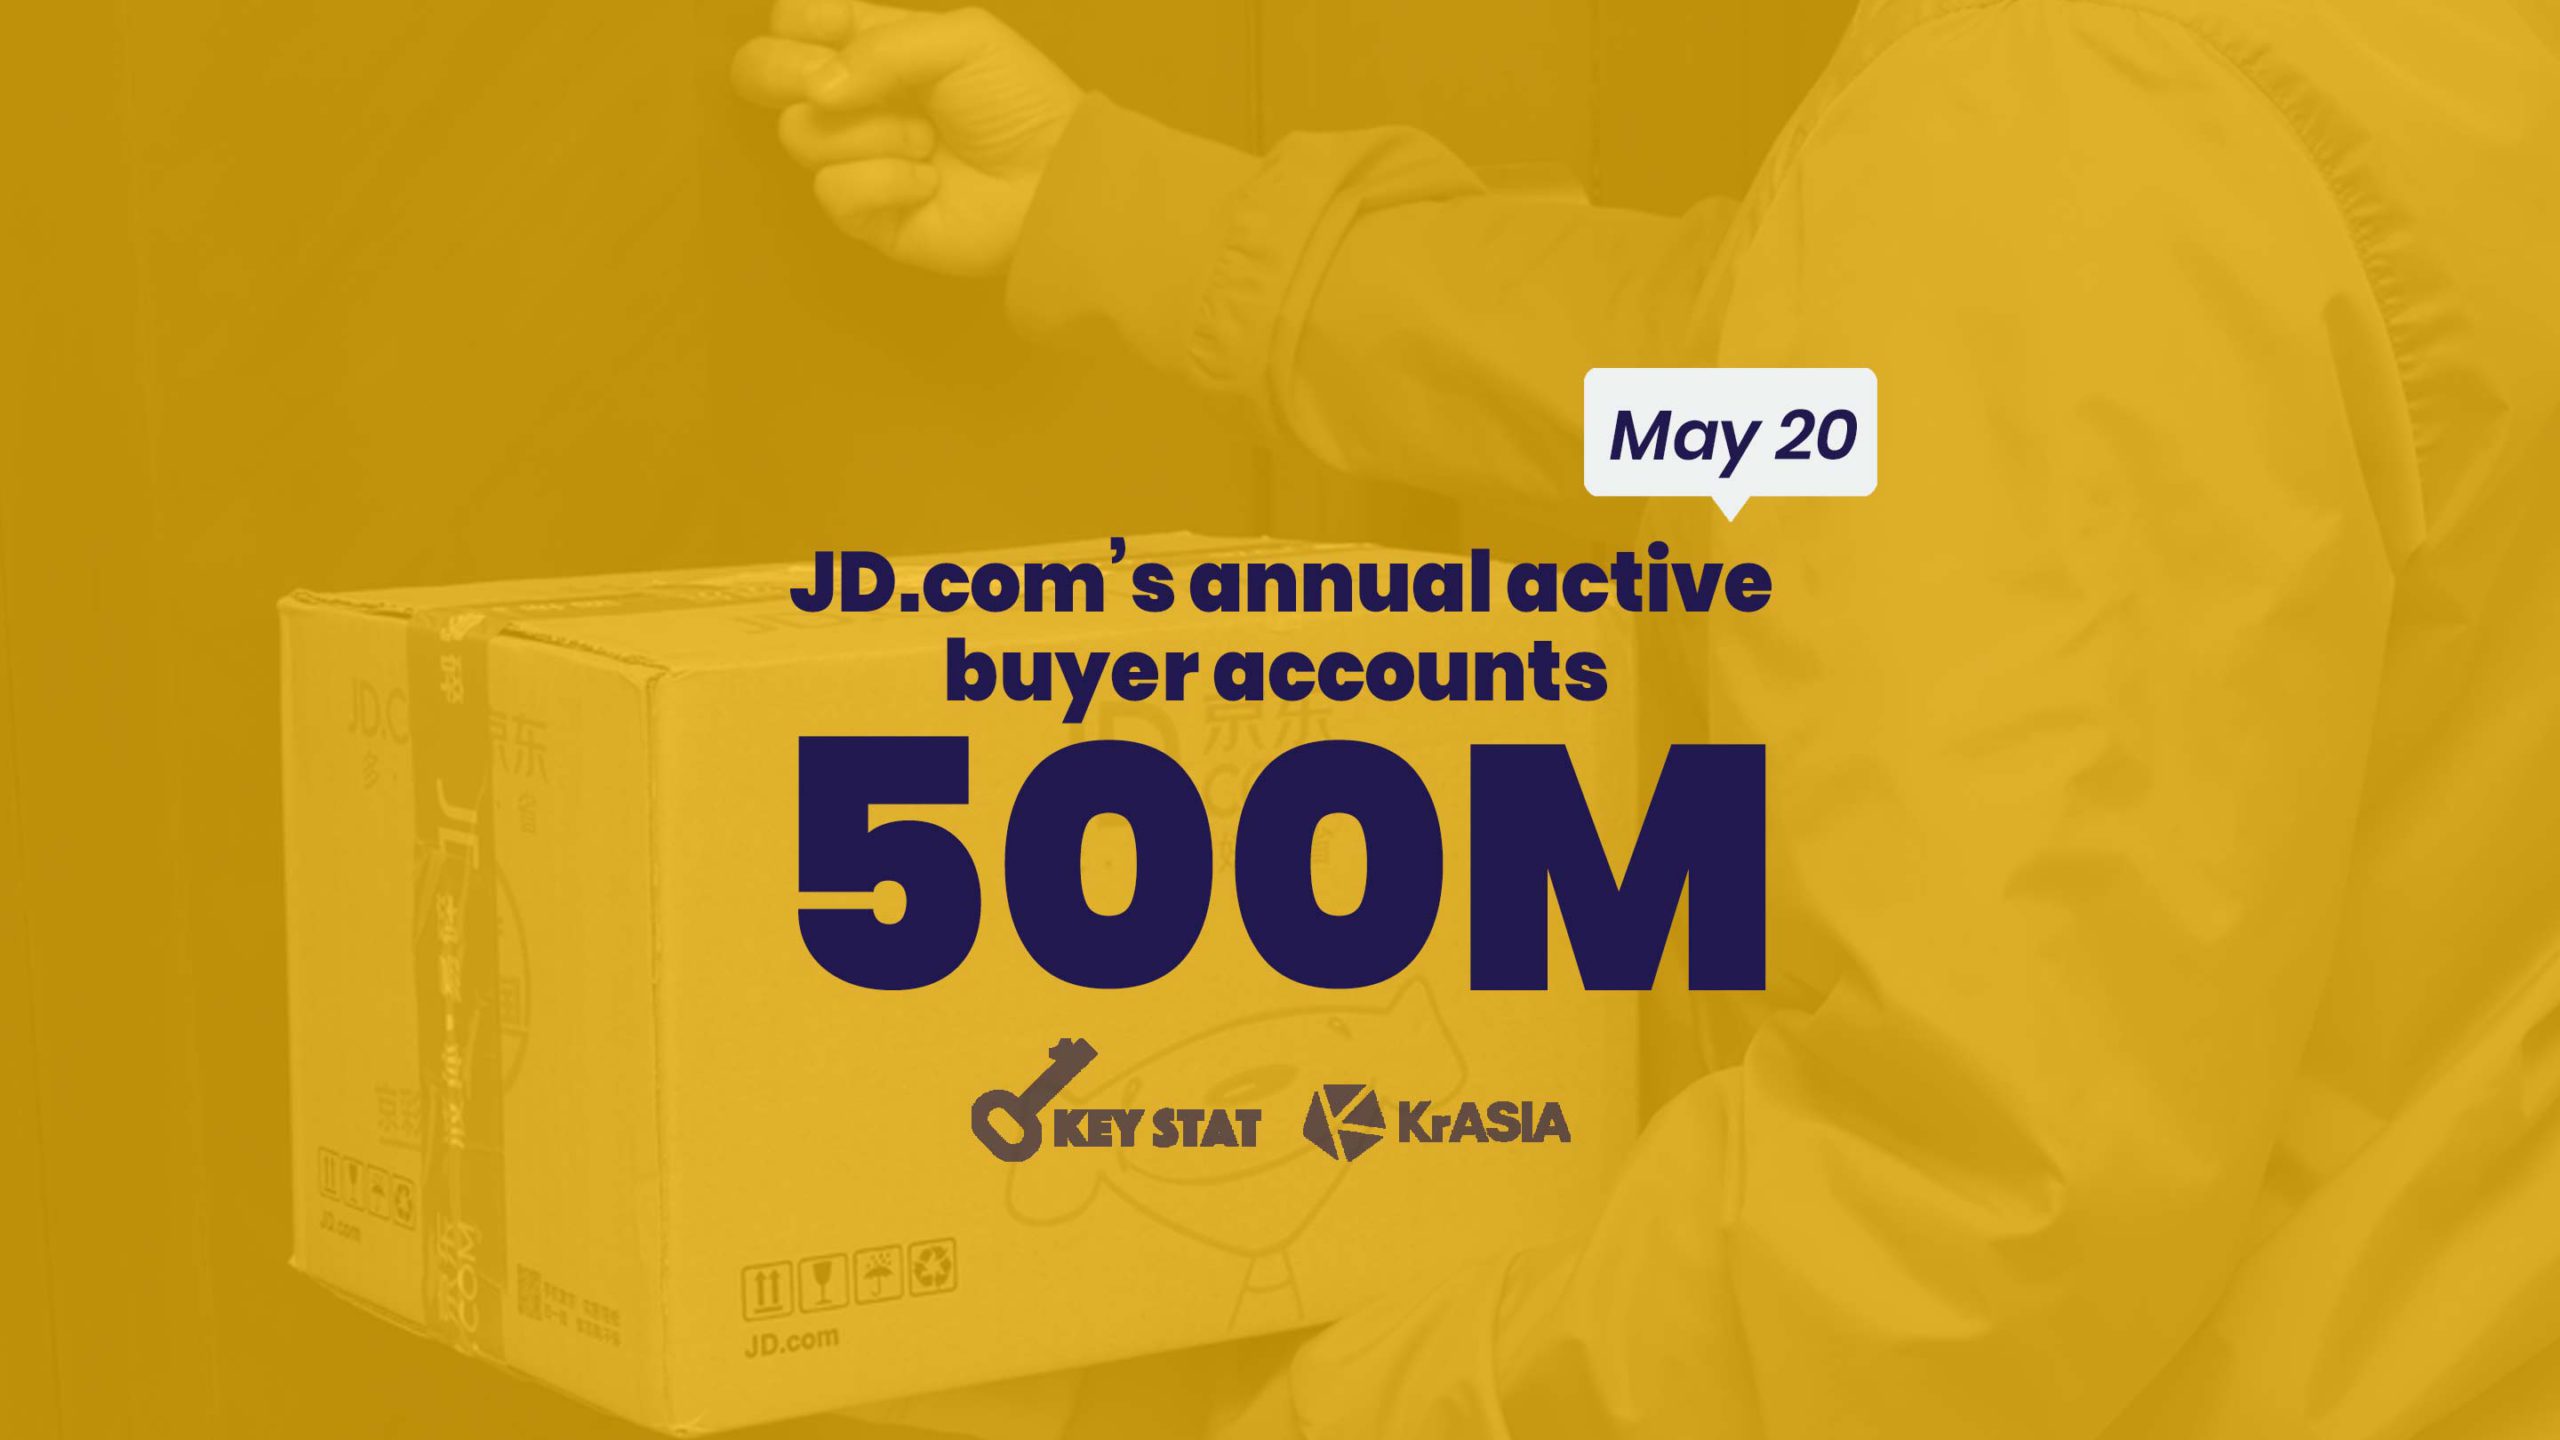 KEY STAT | JD.com maintains momentum with nearly 40% revenue growth in Q1